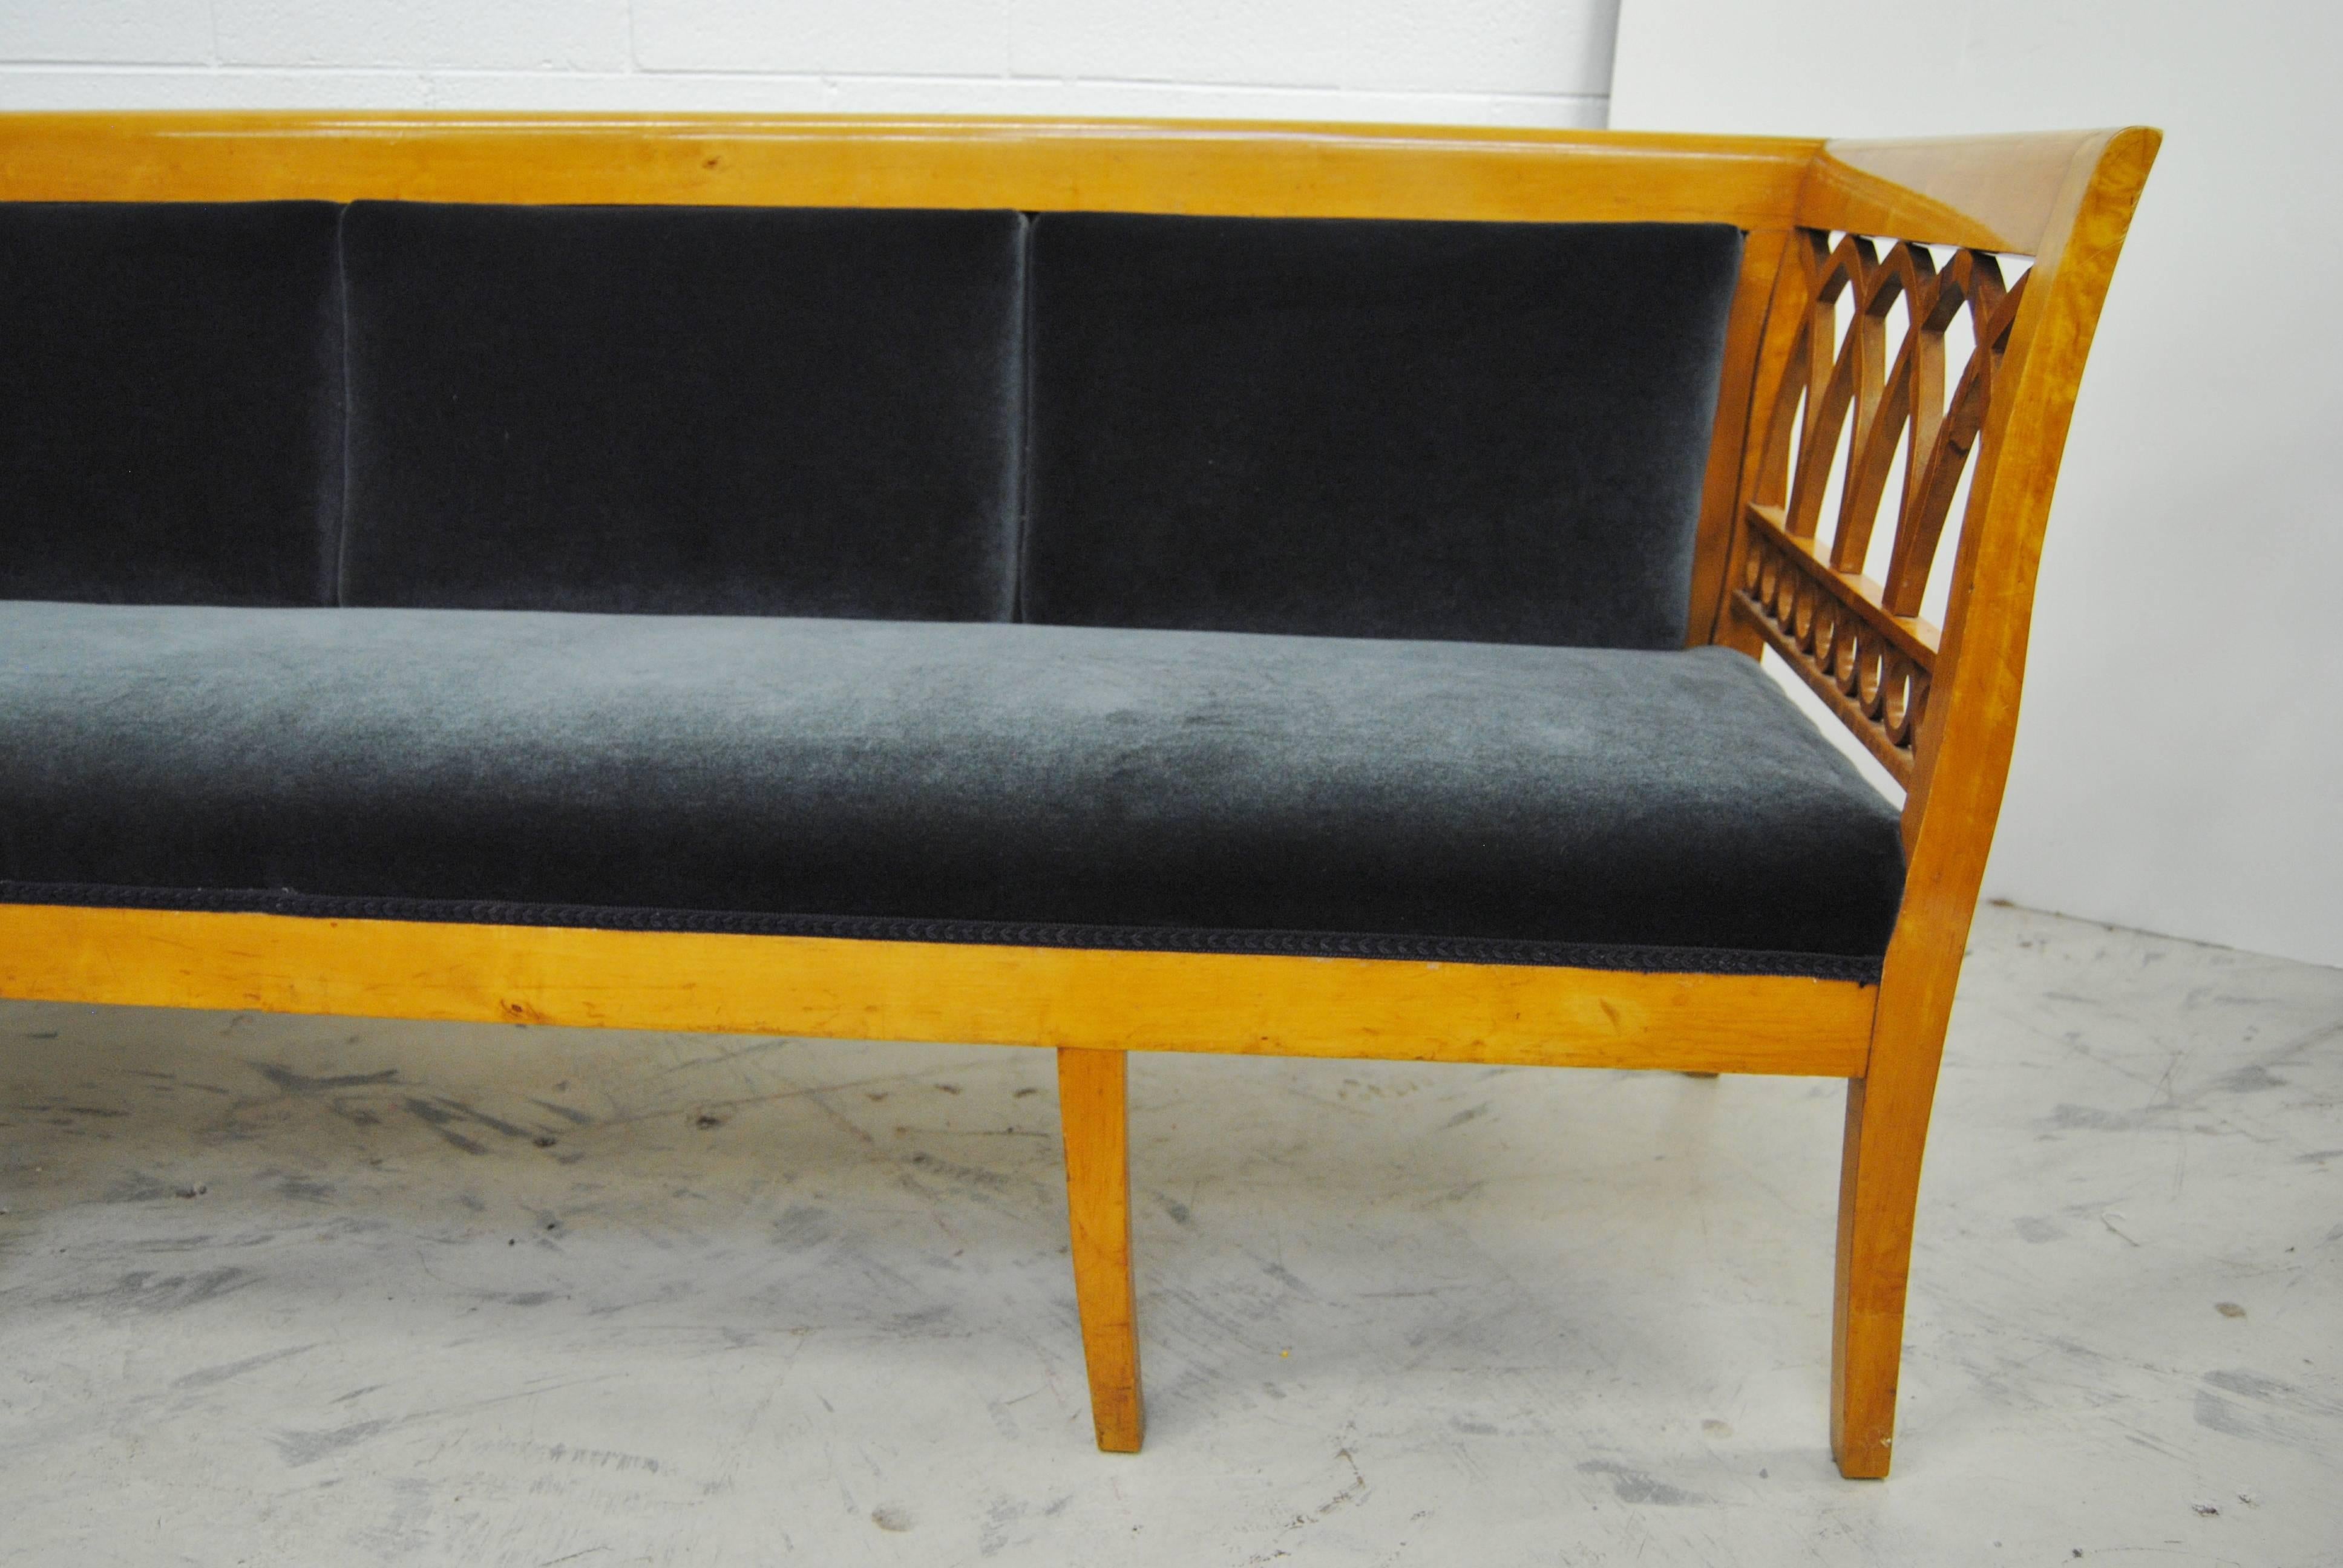 Antique Swedish Biedermeier settee, circa 1865, Beautiful lines with intricate openwork arm end panels. Minor loss of veneer on the inside of one arm, consistent with age of the piece. The settee is upholstered in a dark blue mohair, backed in